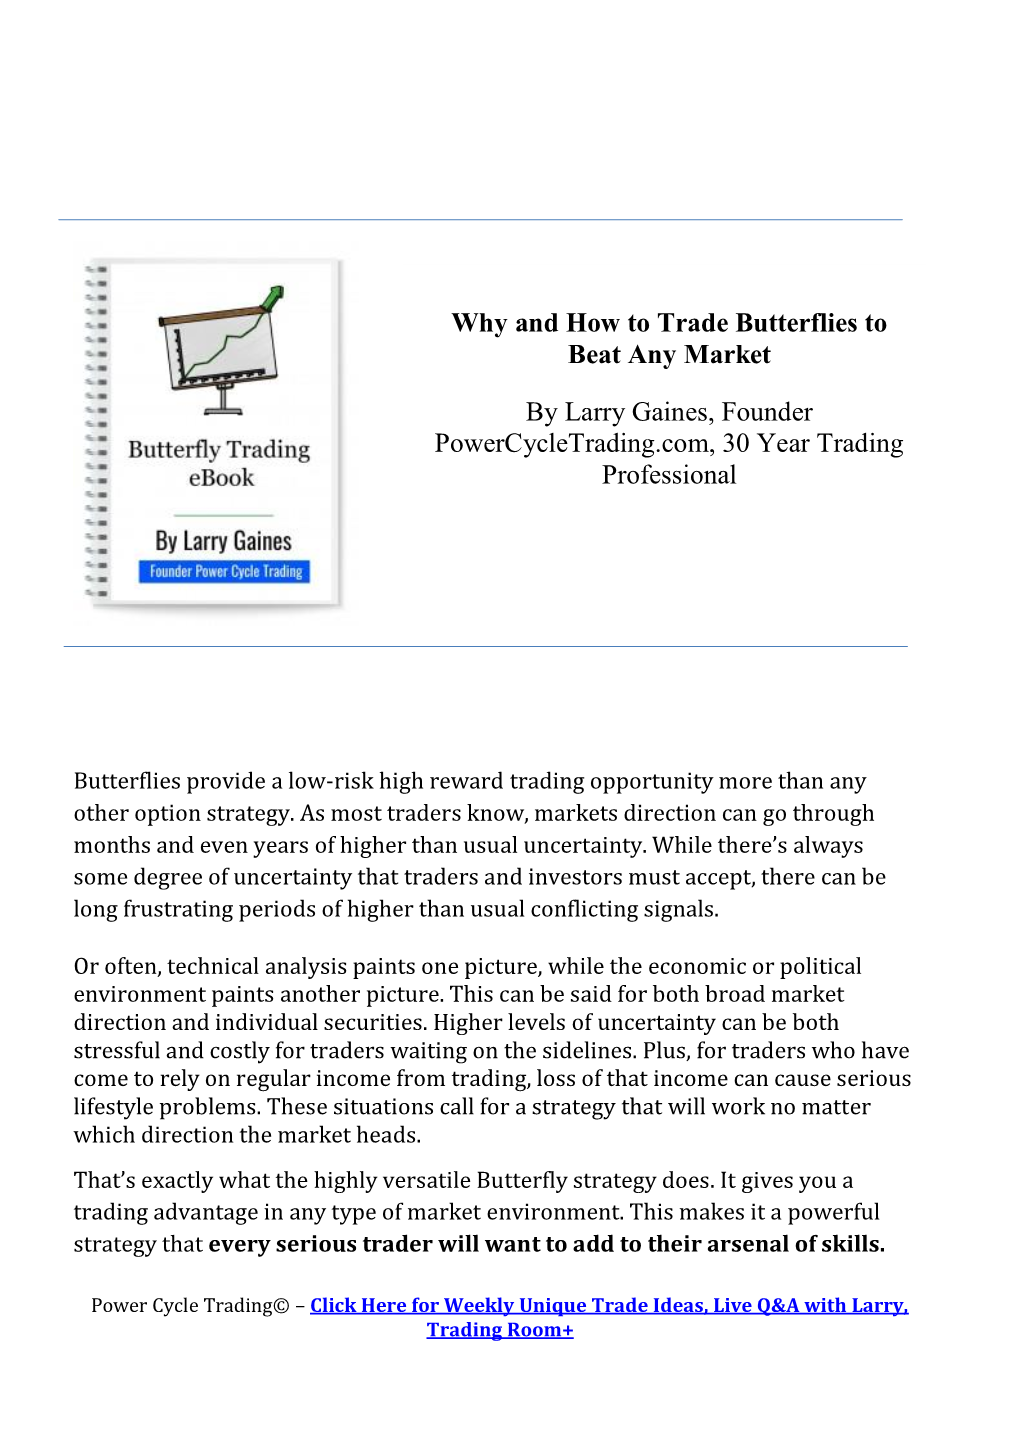 Why and How to Trade Butterflies to Beat Any Market by Larry Gaines